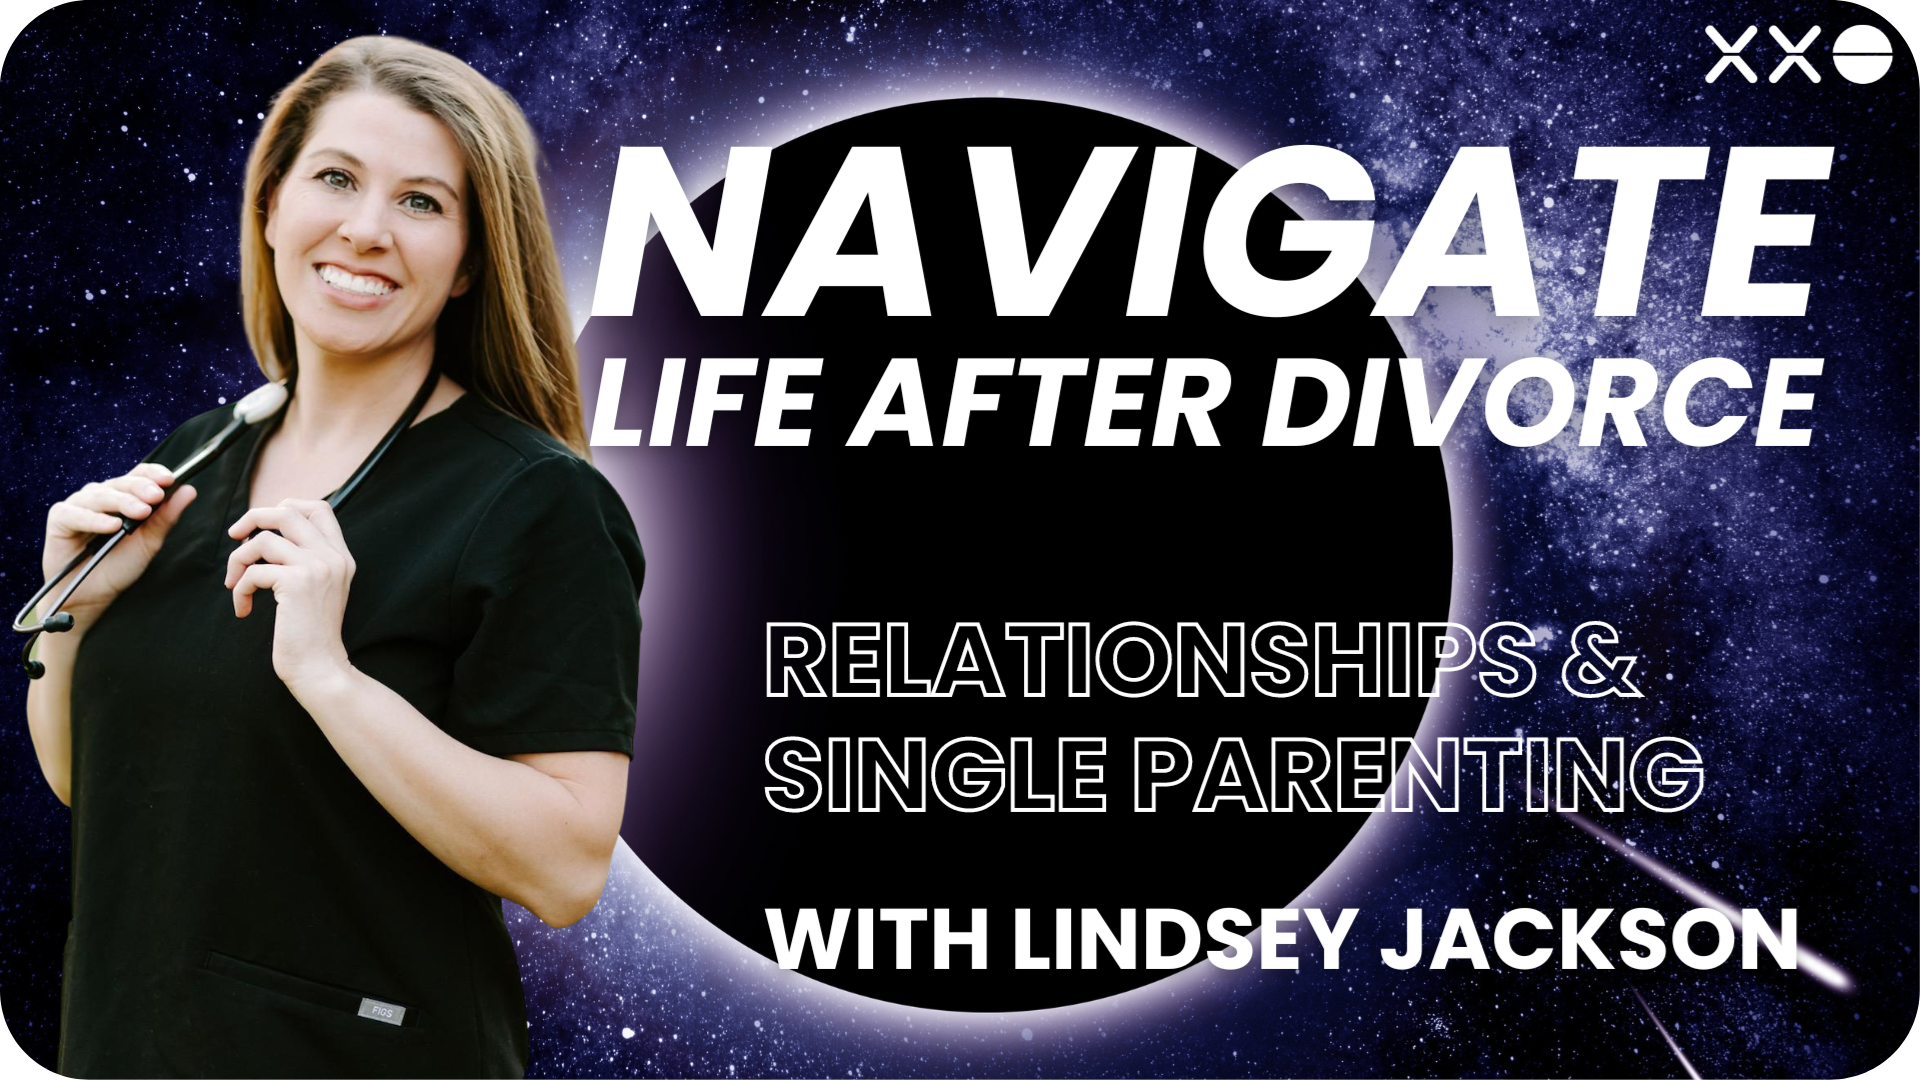 XXO CONNECT LINDSEY JACKSON NAVIGATE LIFE AFTER DIVORCE RELATIONSHIPS DATING AND SINGLE PARENTING.png